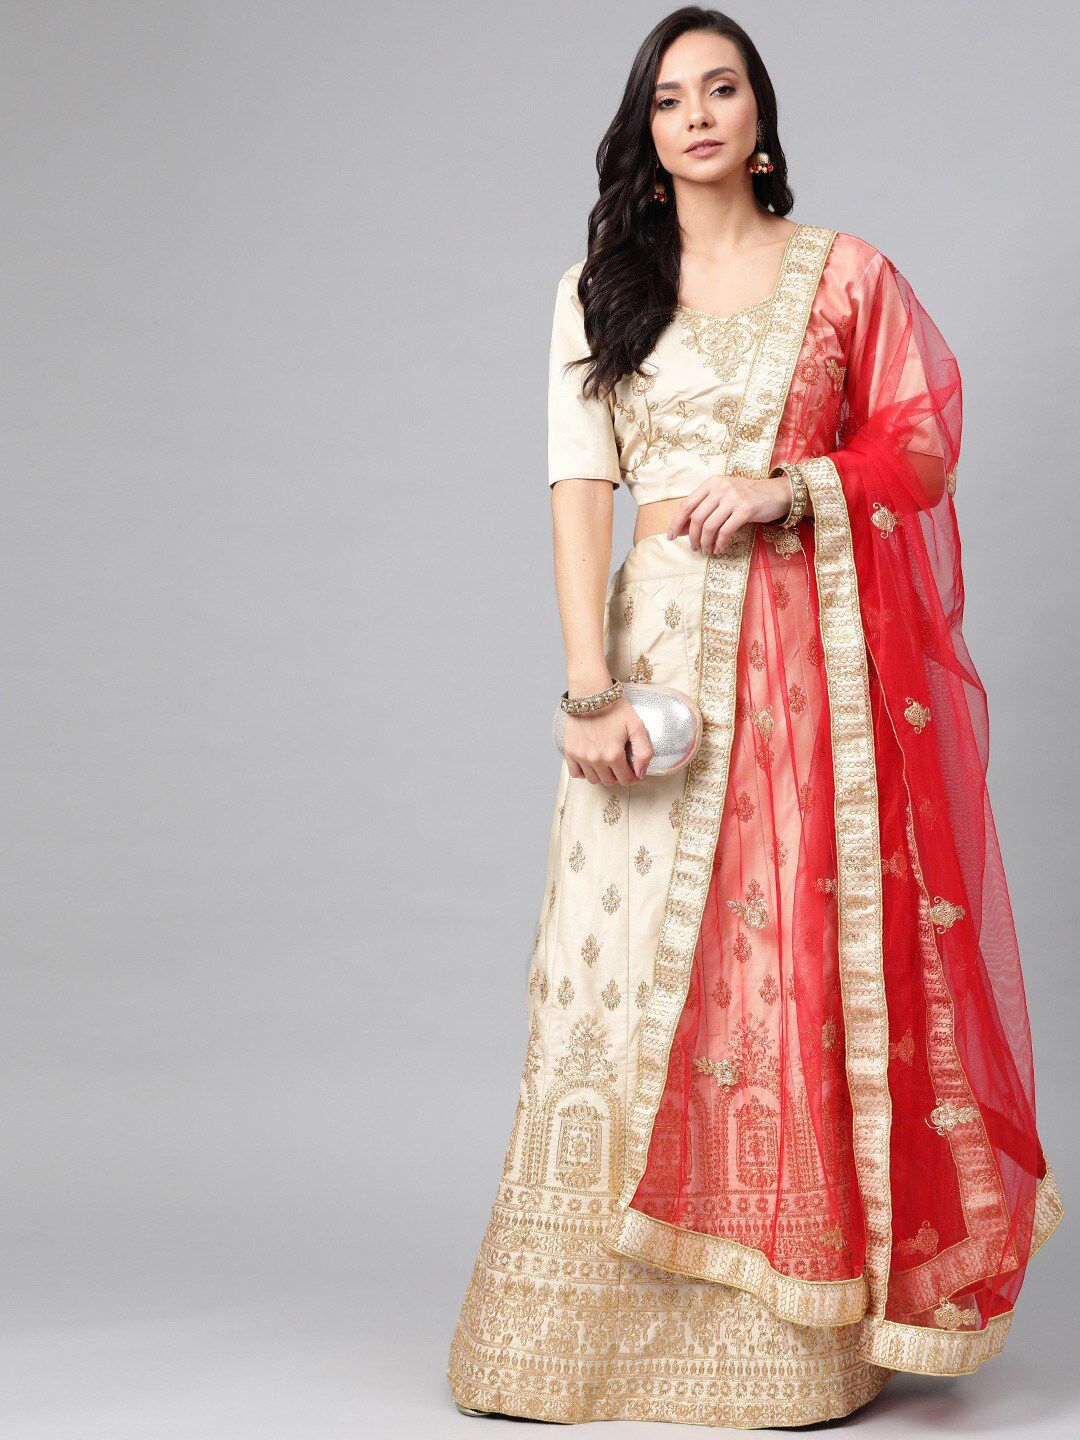 SHOPGARB Cream-Coloured & Red Embroidered Thread Work Semi-Stitched Lehenga & Unstitched Blouse With Dupatta Price in India